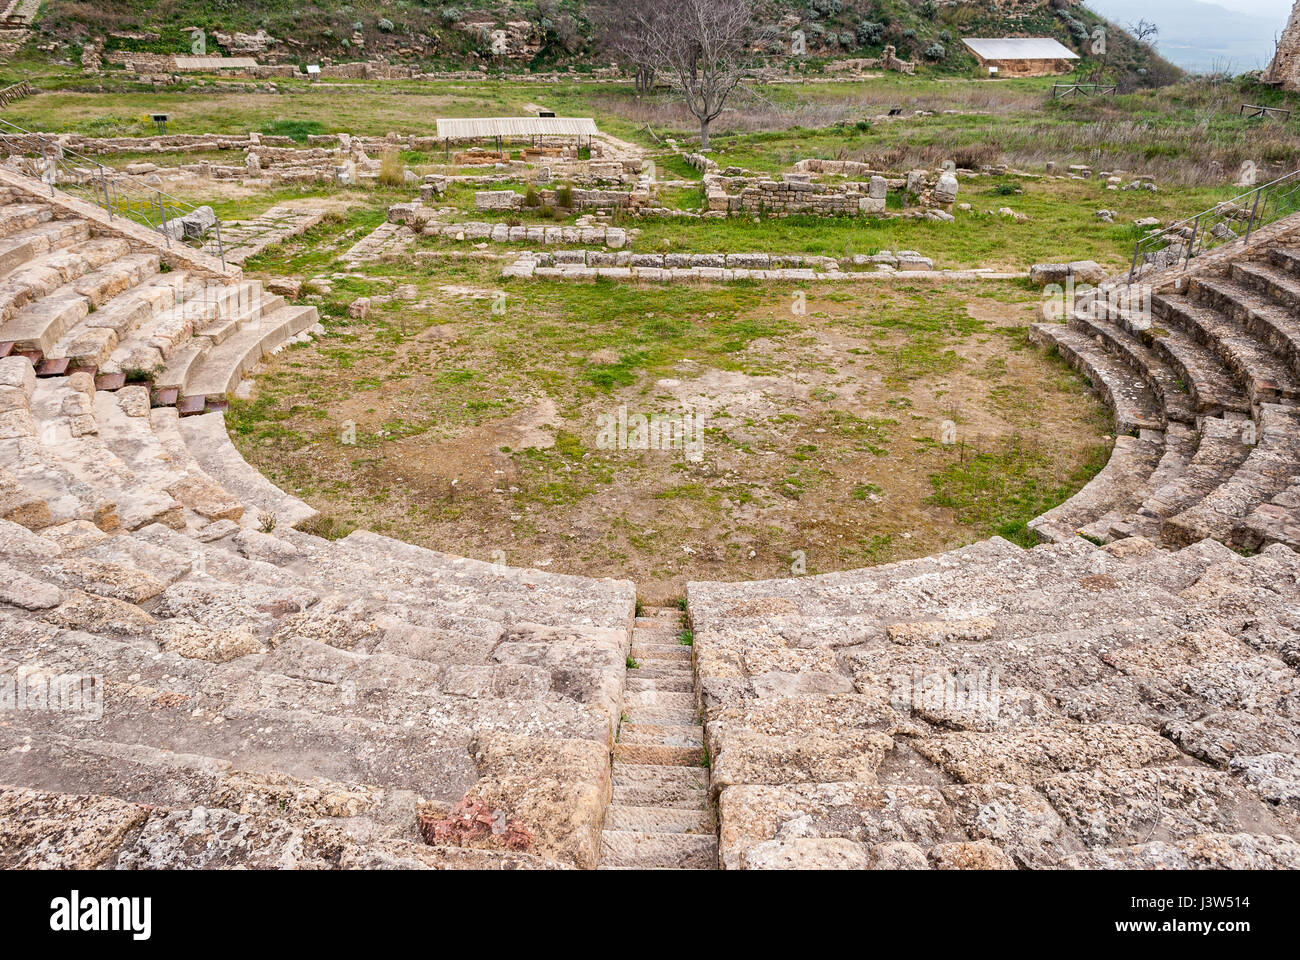 The theater of the ancient greek city of Morgantina, in Sicily Stock Photo